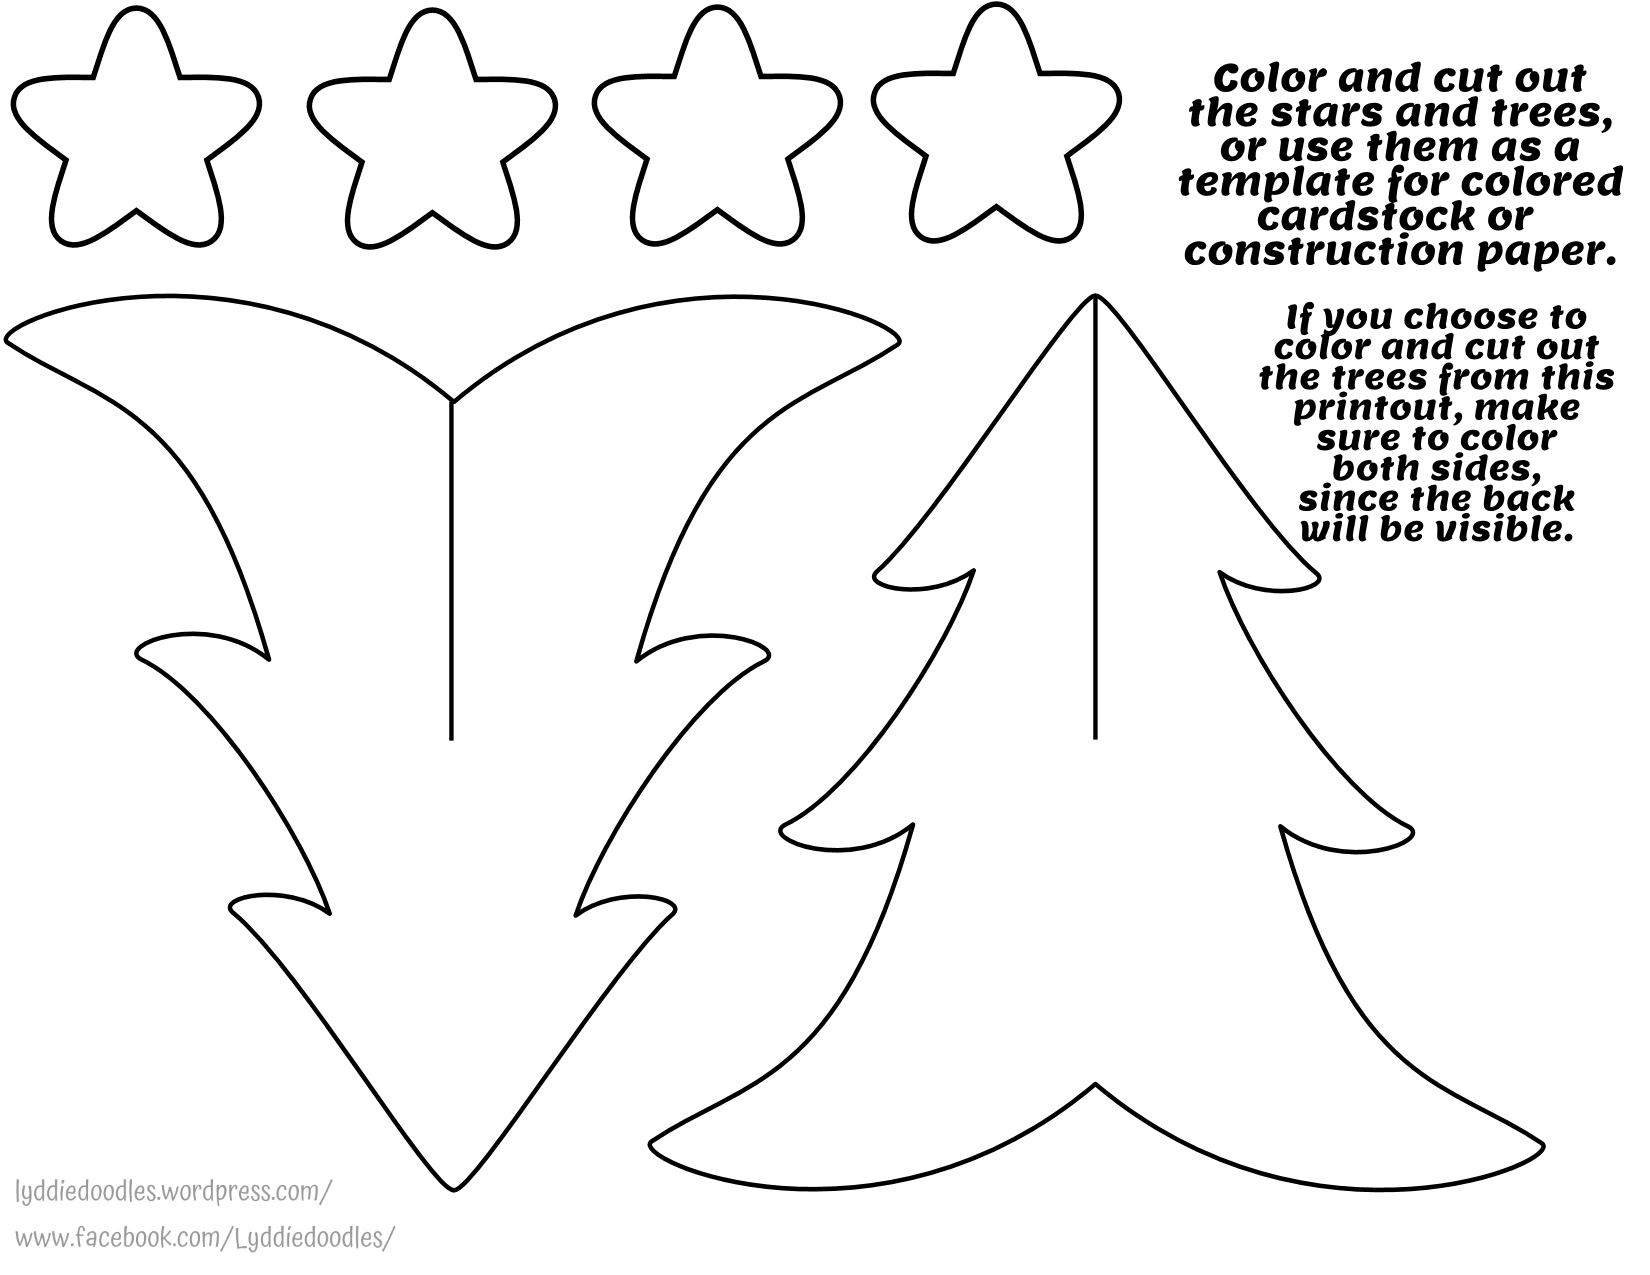 3-D Paper Tree and Stars Template